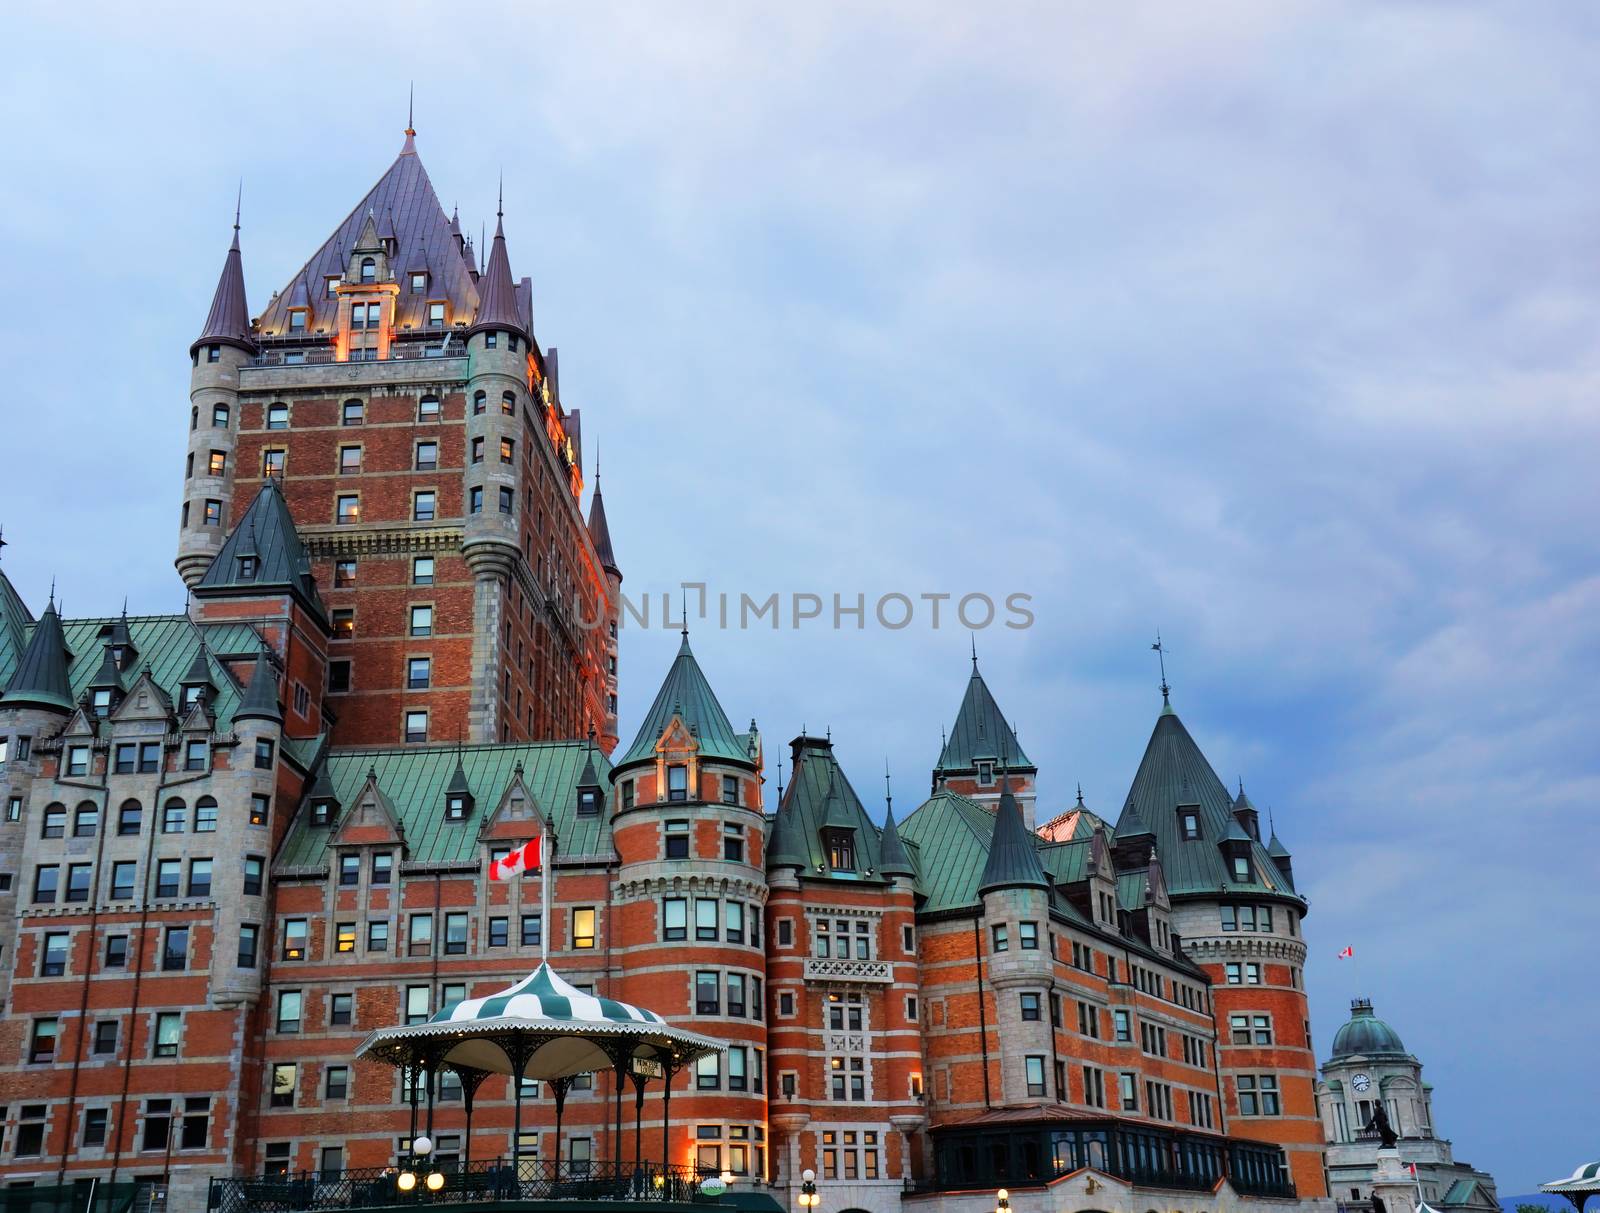 Quebec Chateau Frontenac at sunset by Mirage3